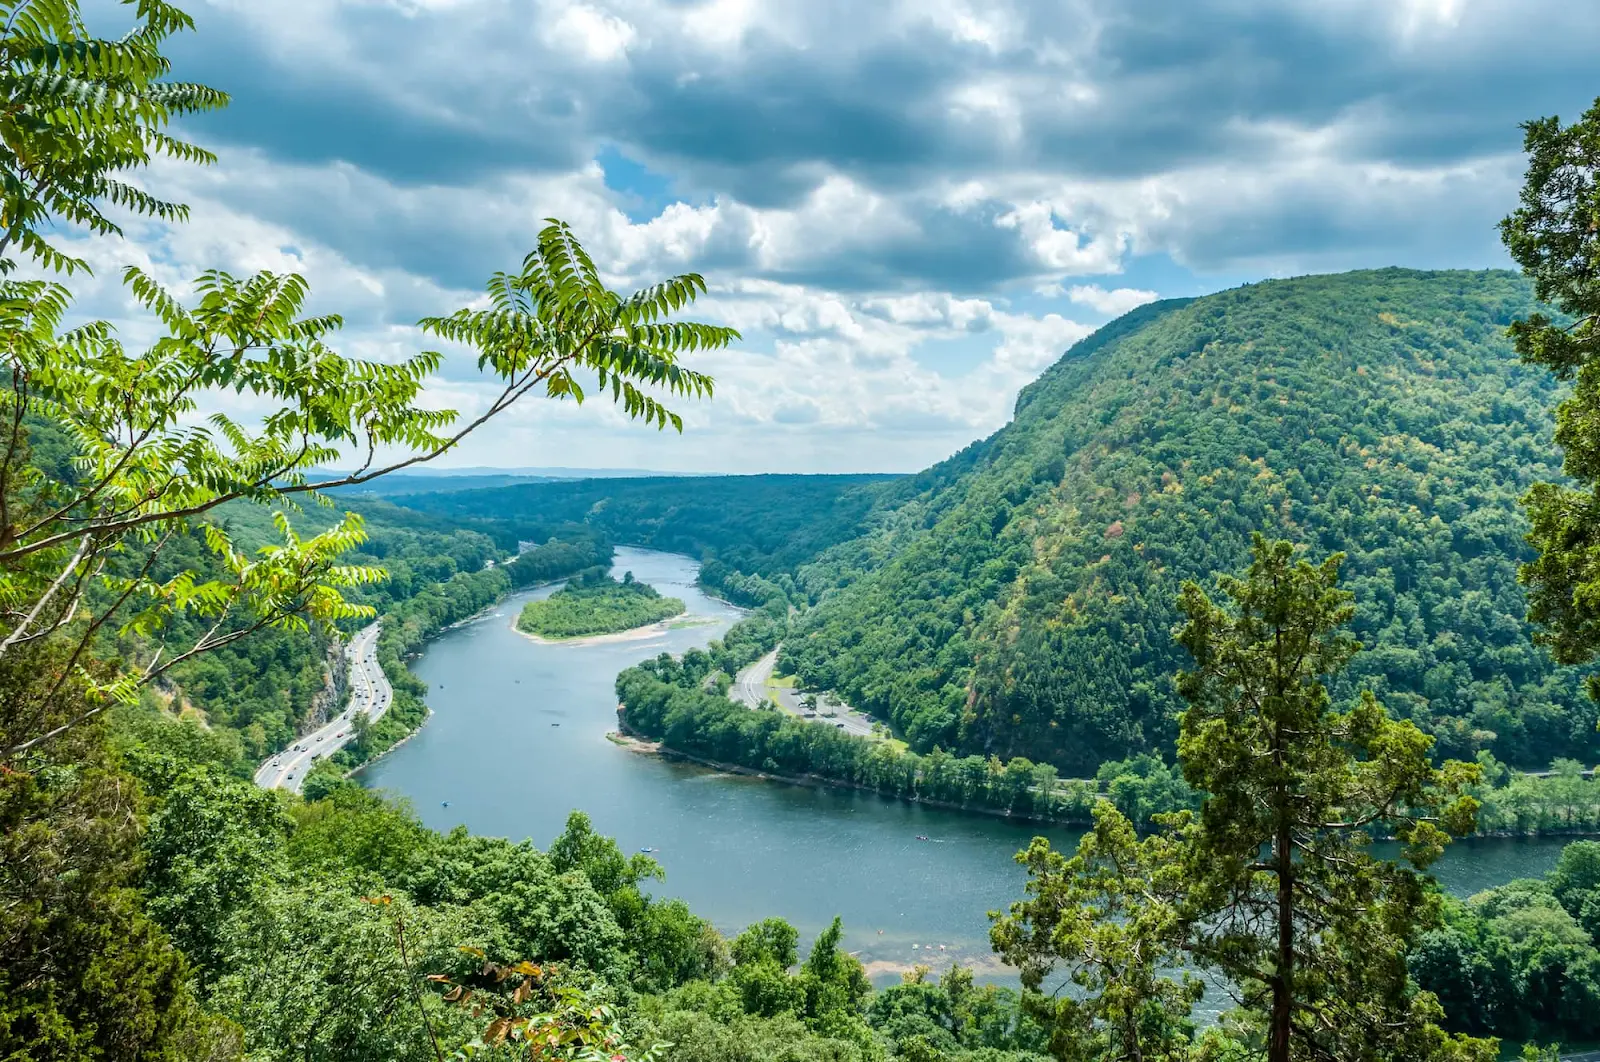 The Delaware Water Gap National Recreation Area